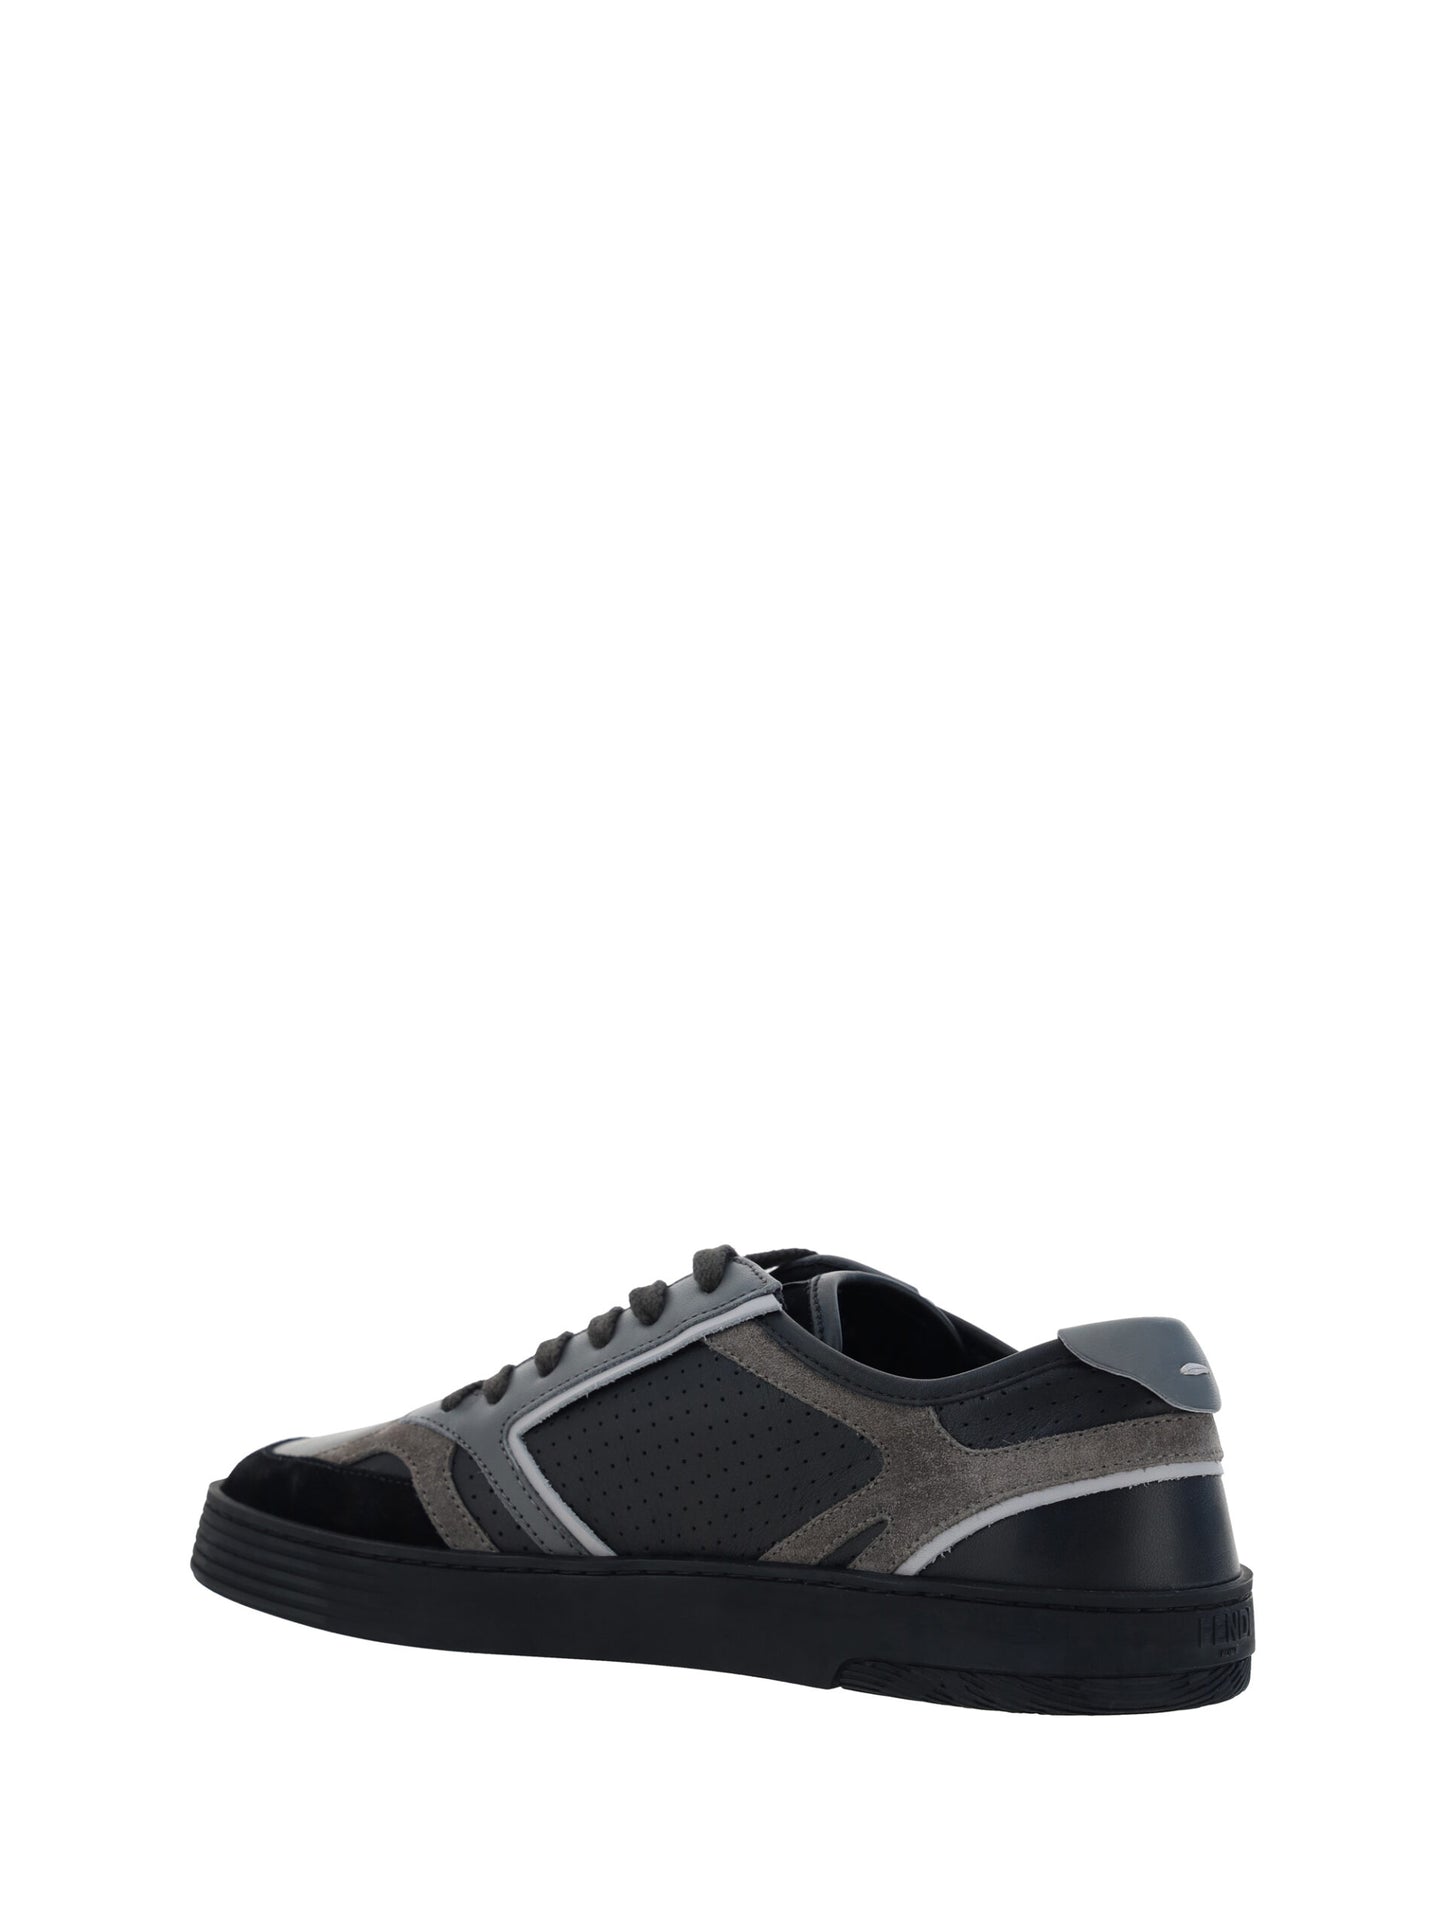 Elevate Your Steps with Sleek Monochrome Sneakers